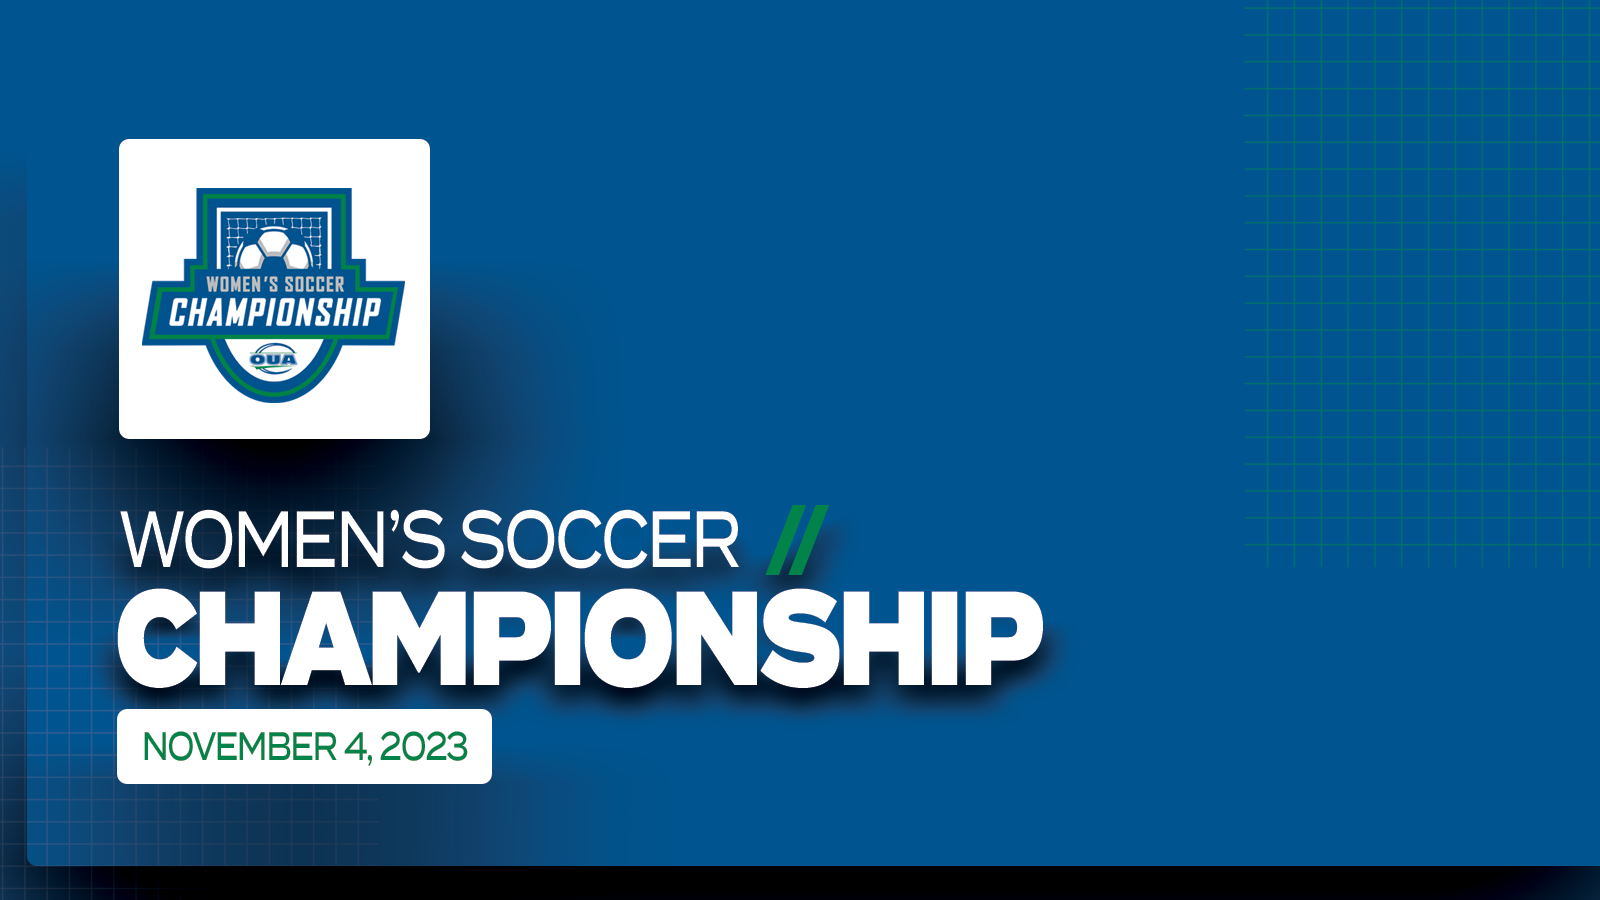 Predominantly blue graphic featuring white text that reads, 'Women's Soccer Championship, November 4, 2023' in the lower third, with the OUA Women's Soccer Championship logo placed above it on a small white square